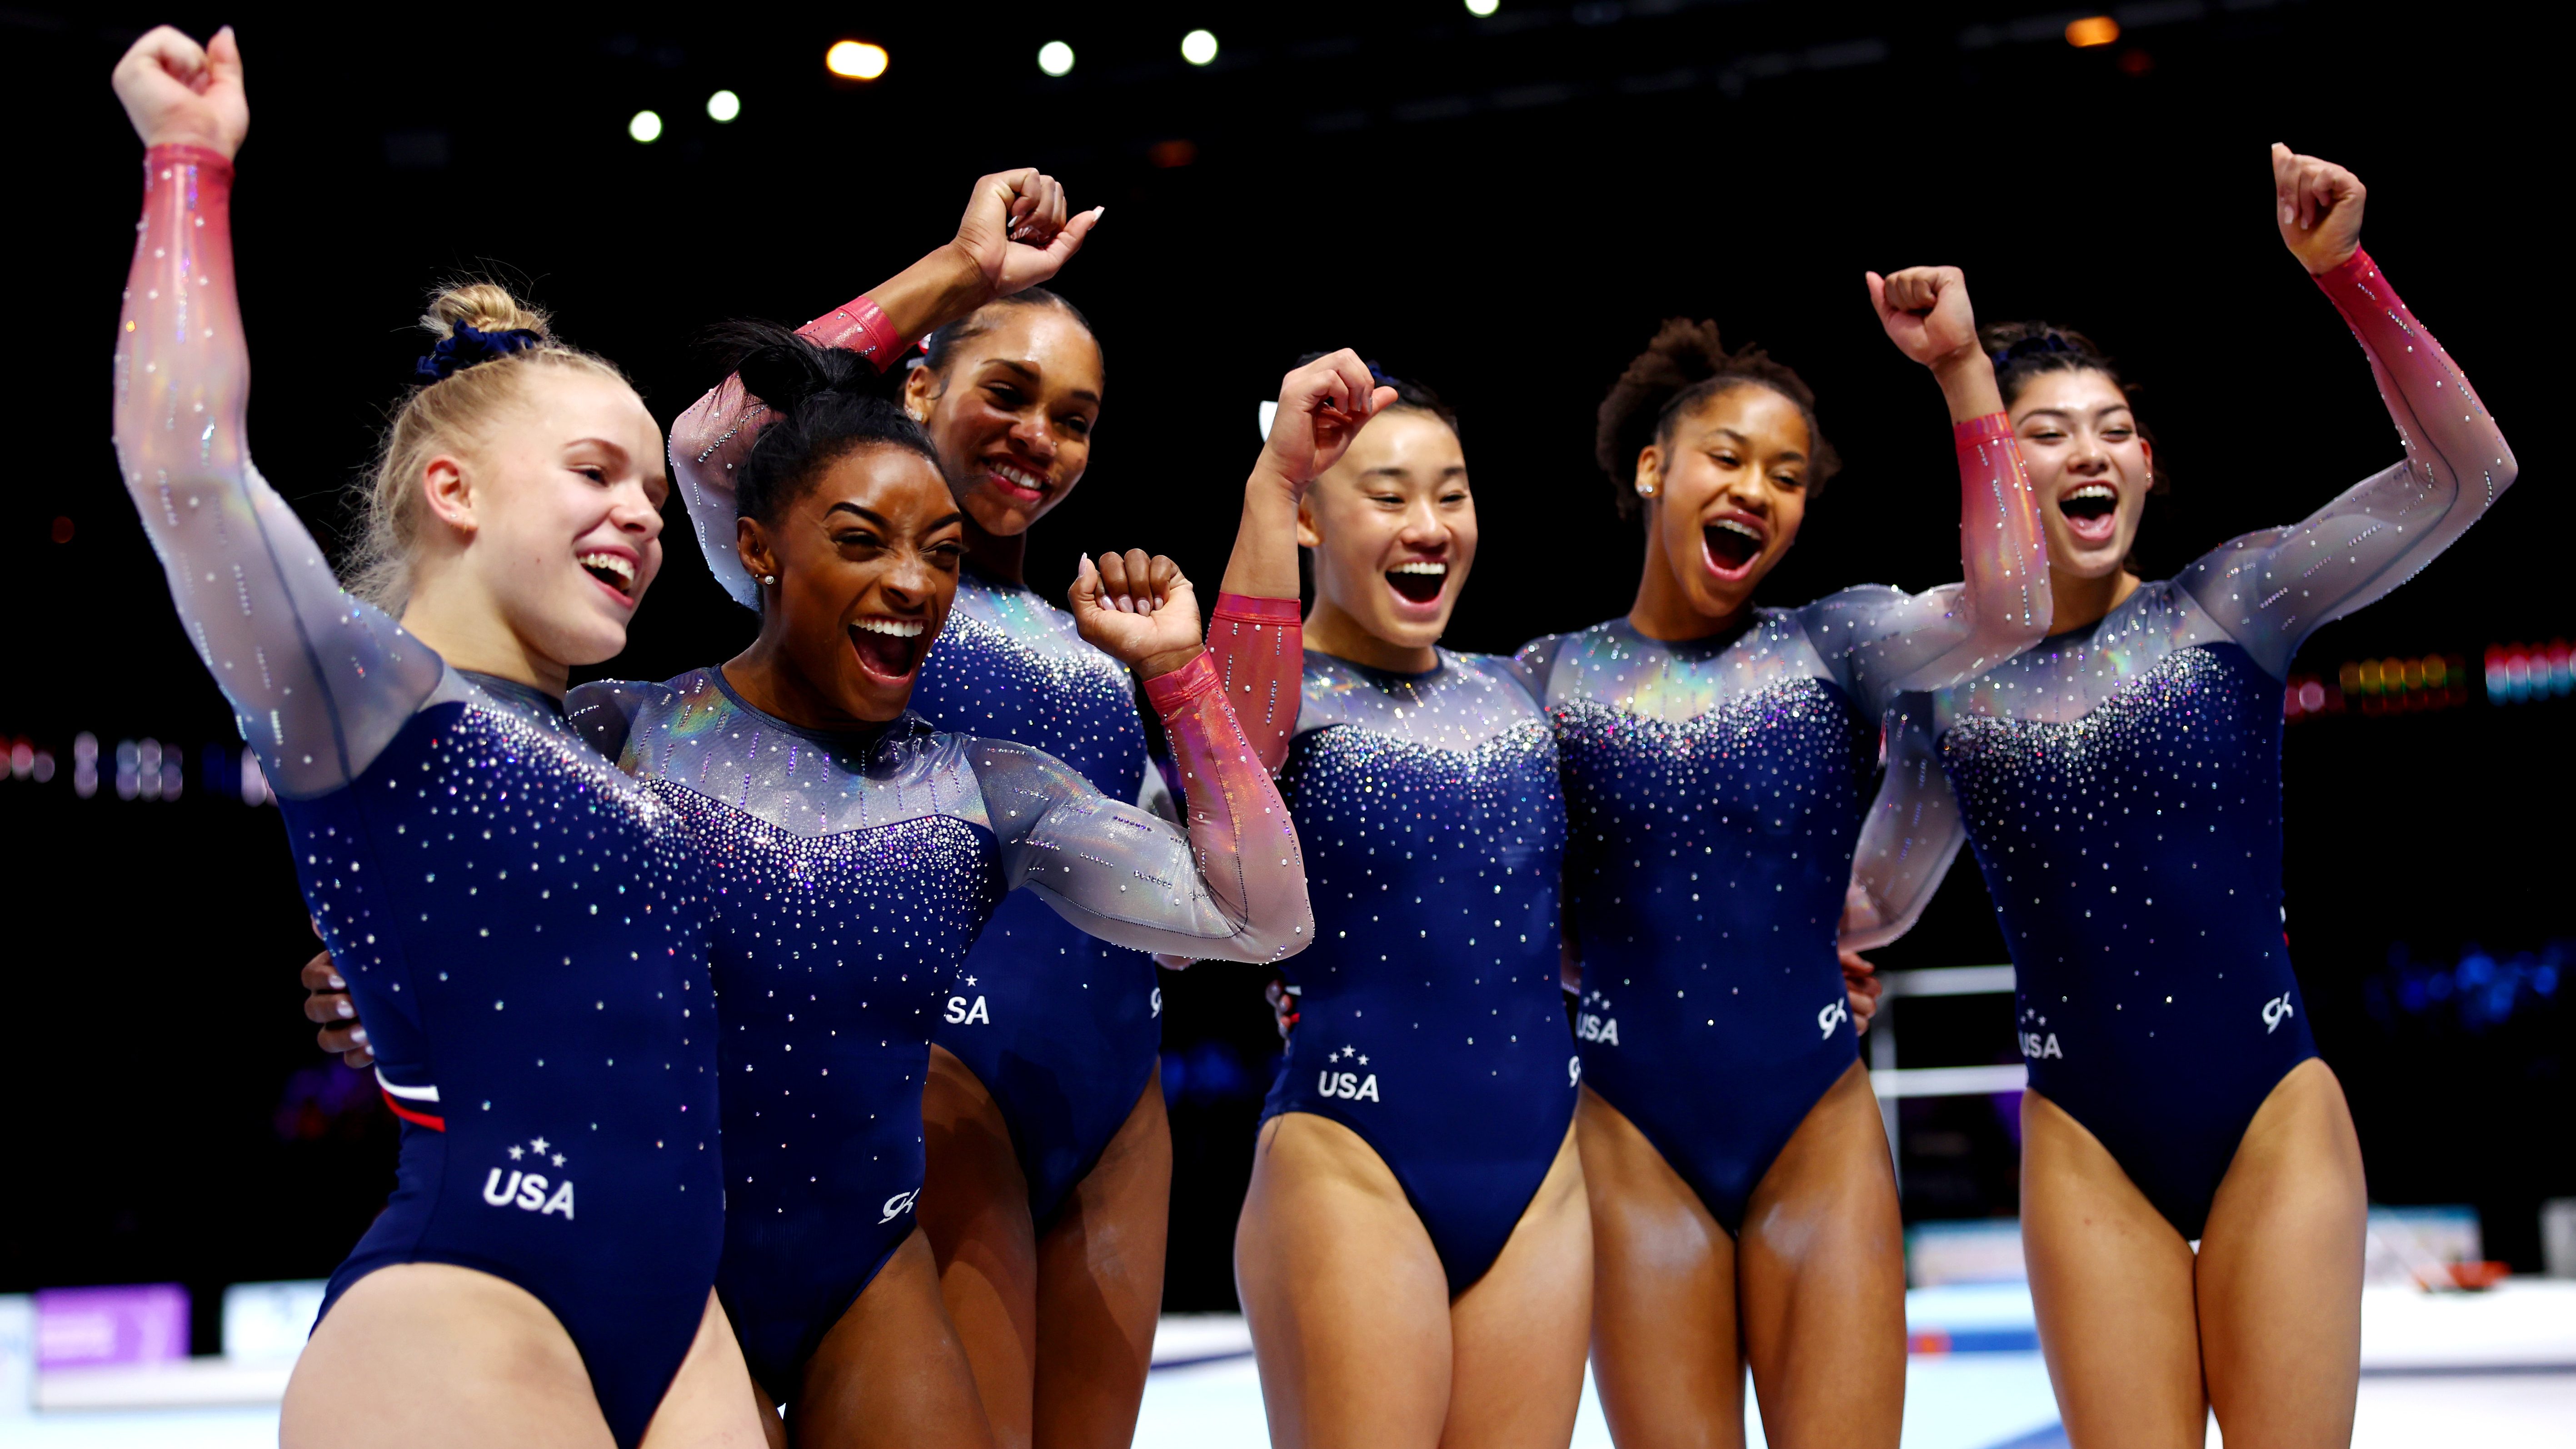 Simone Biles leads U.S. women to record 7th straight team title at